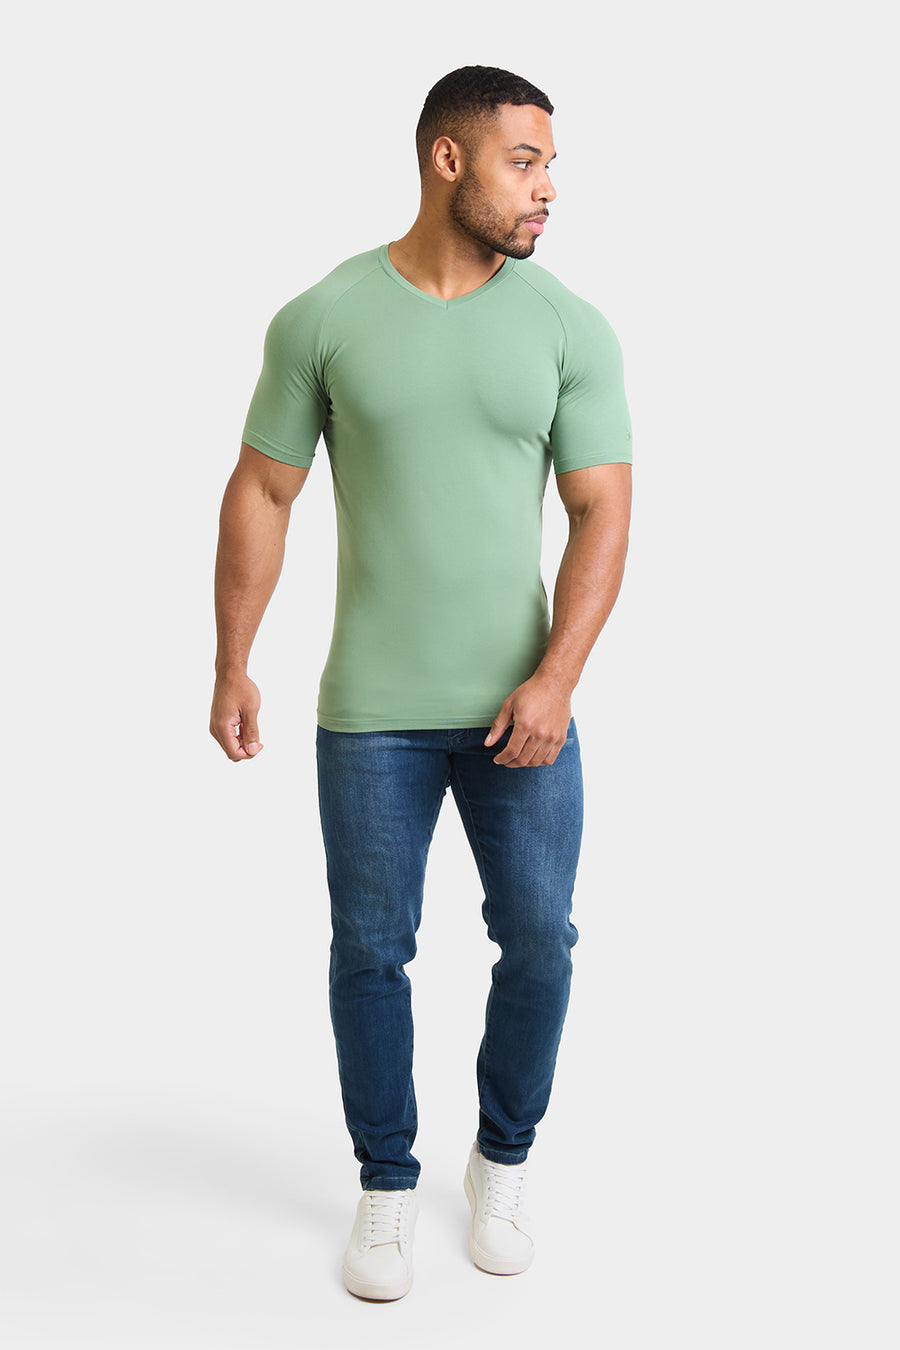 Athletic Fit V-Neck in Soft Sage - TAILORED ATHLETE - USA